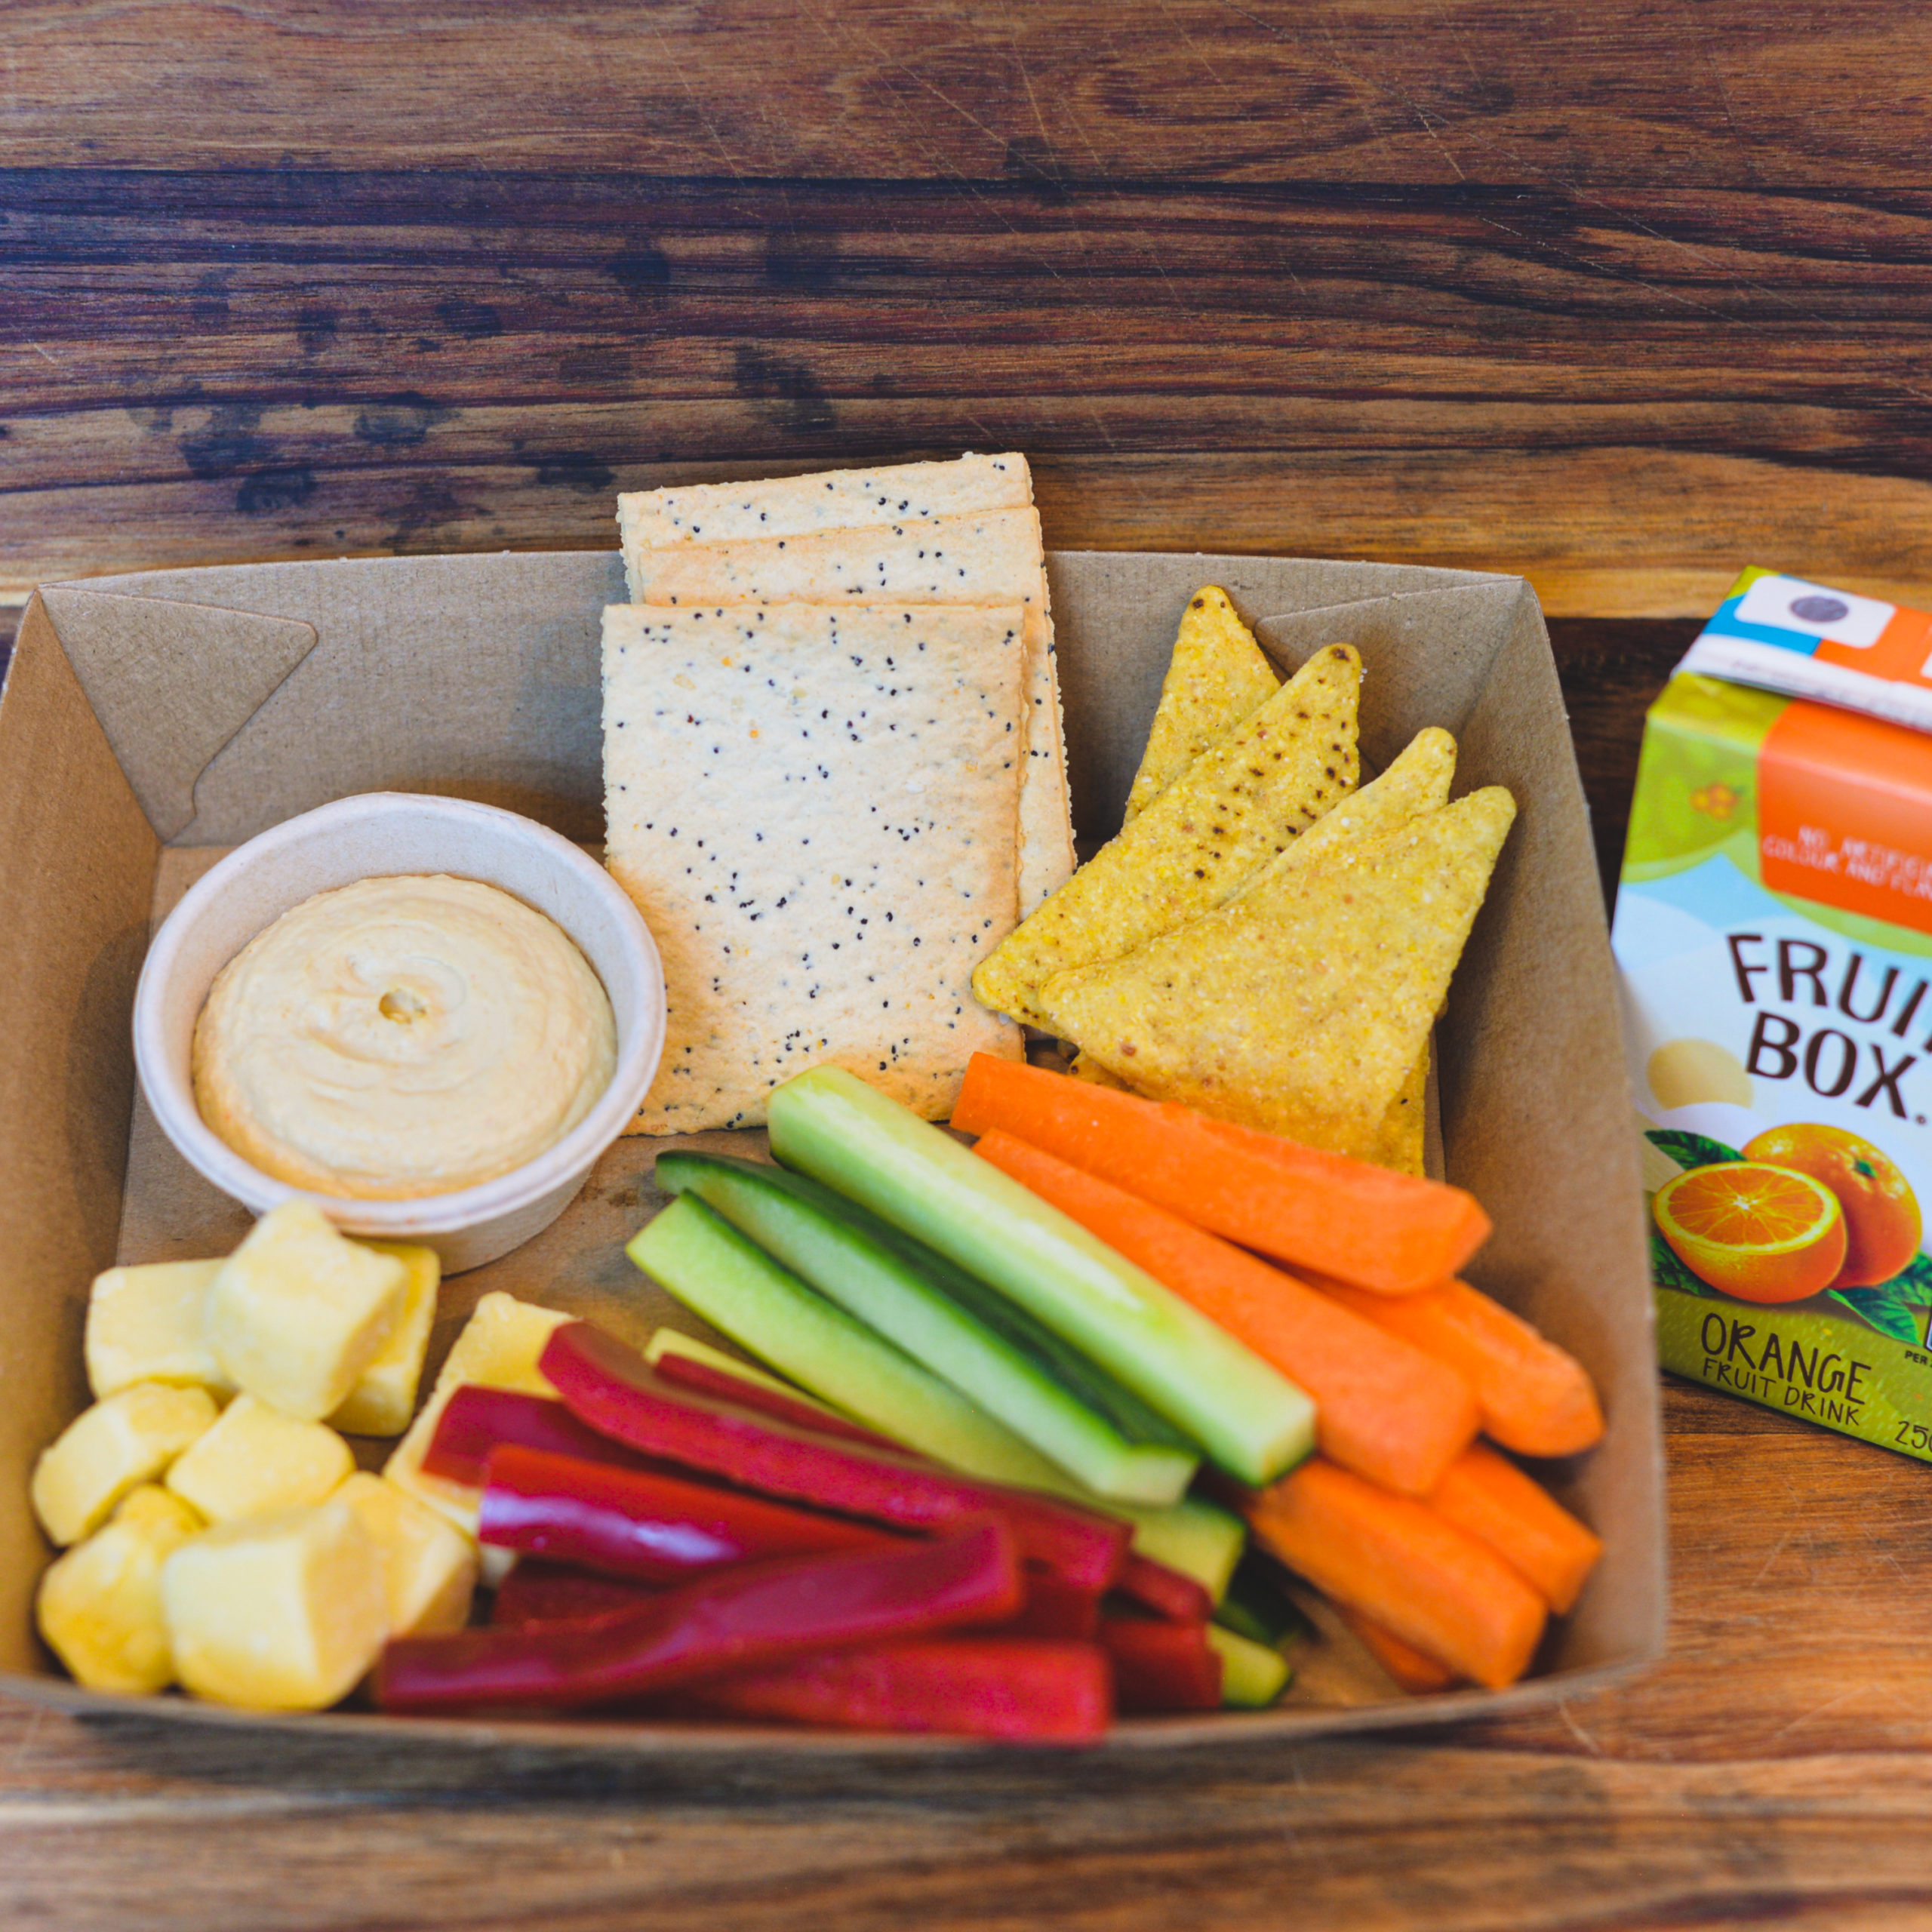 Carrot, Capsicum and Cucumber batons, lavosh, hummus, cheese cubes, corn chips and Juice($38.00)